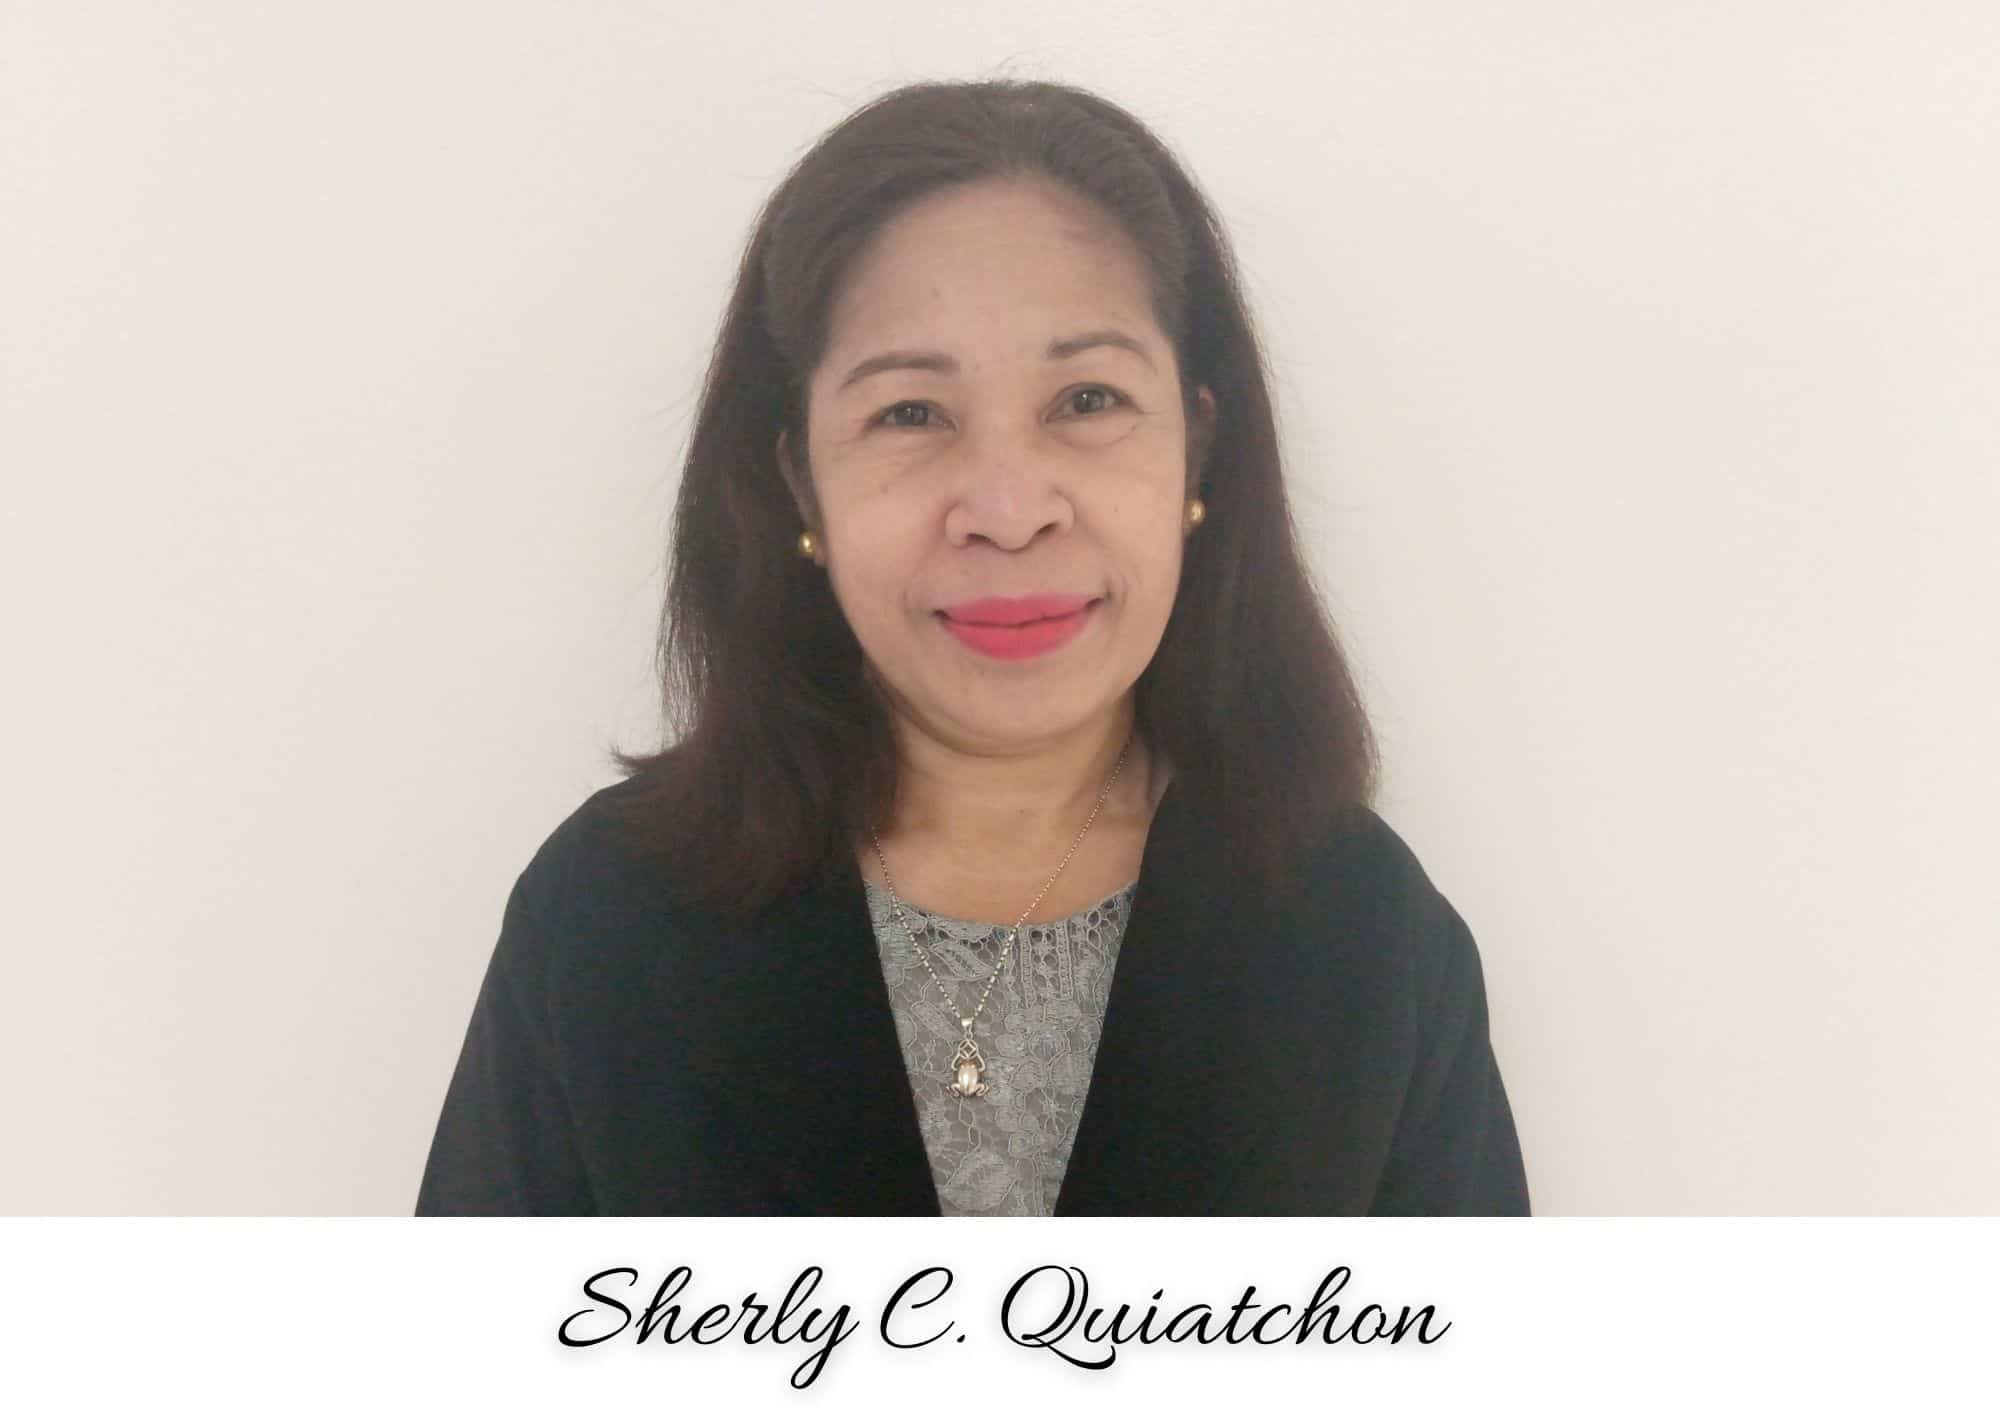 Certified PainFree Provider LEVEL 1 - sherly c. quiatchon